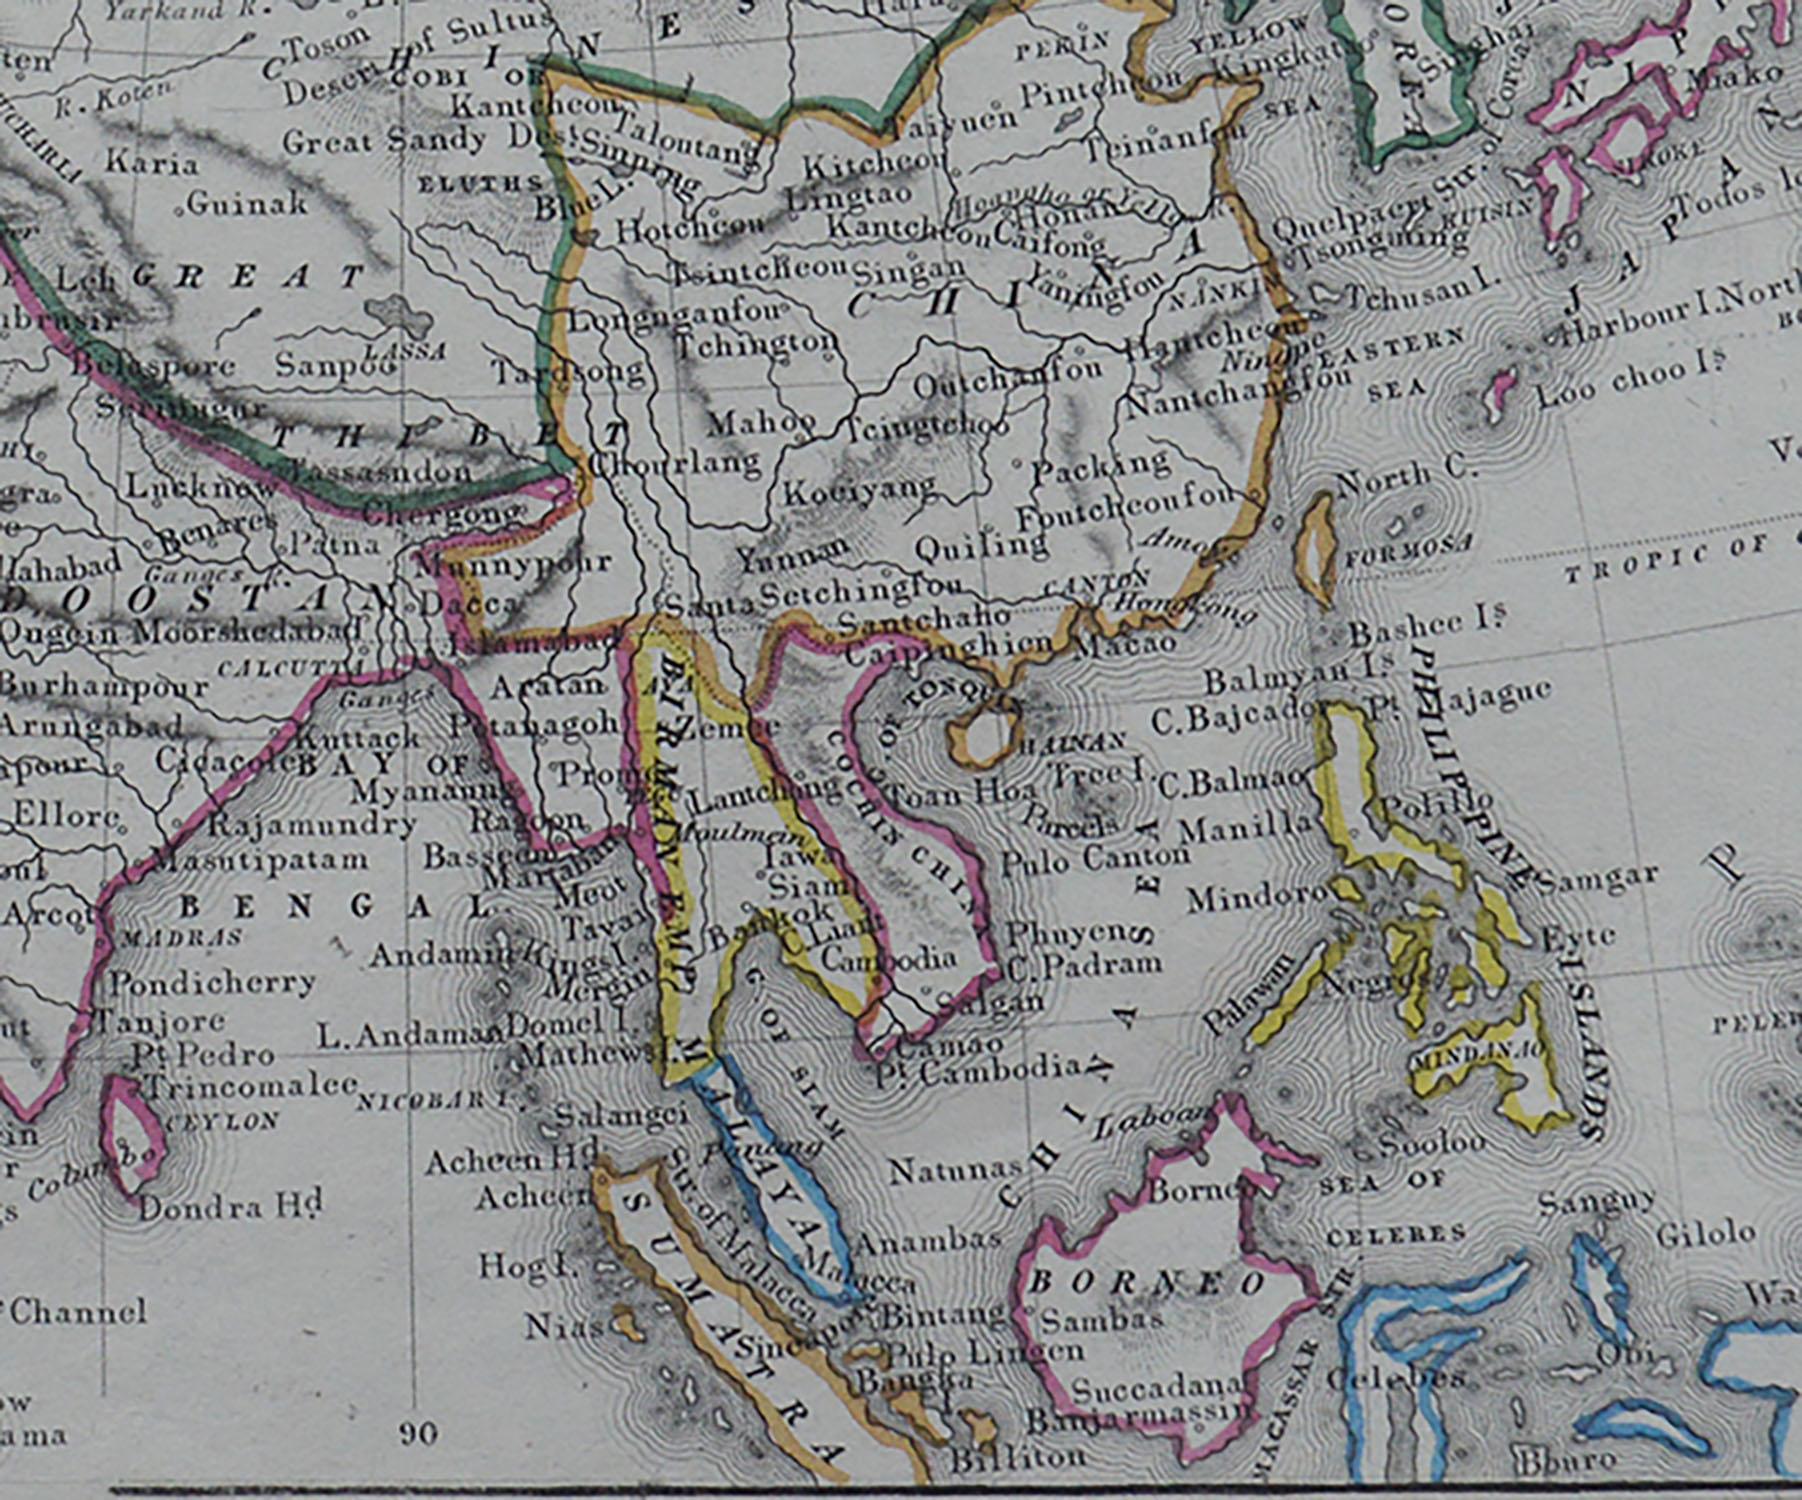 Other Original Antique Map of Asia by Becker, circa 1840